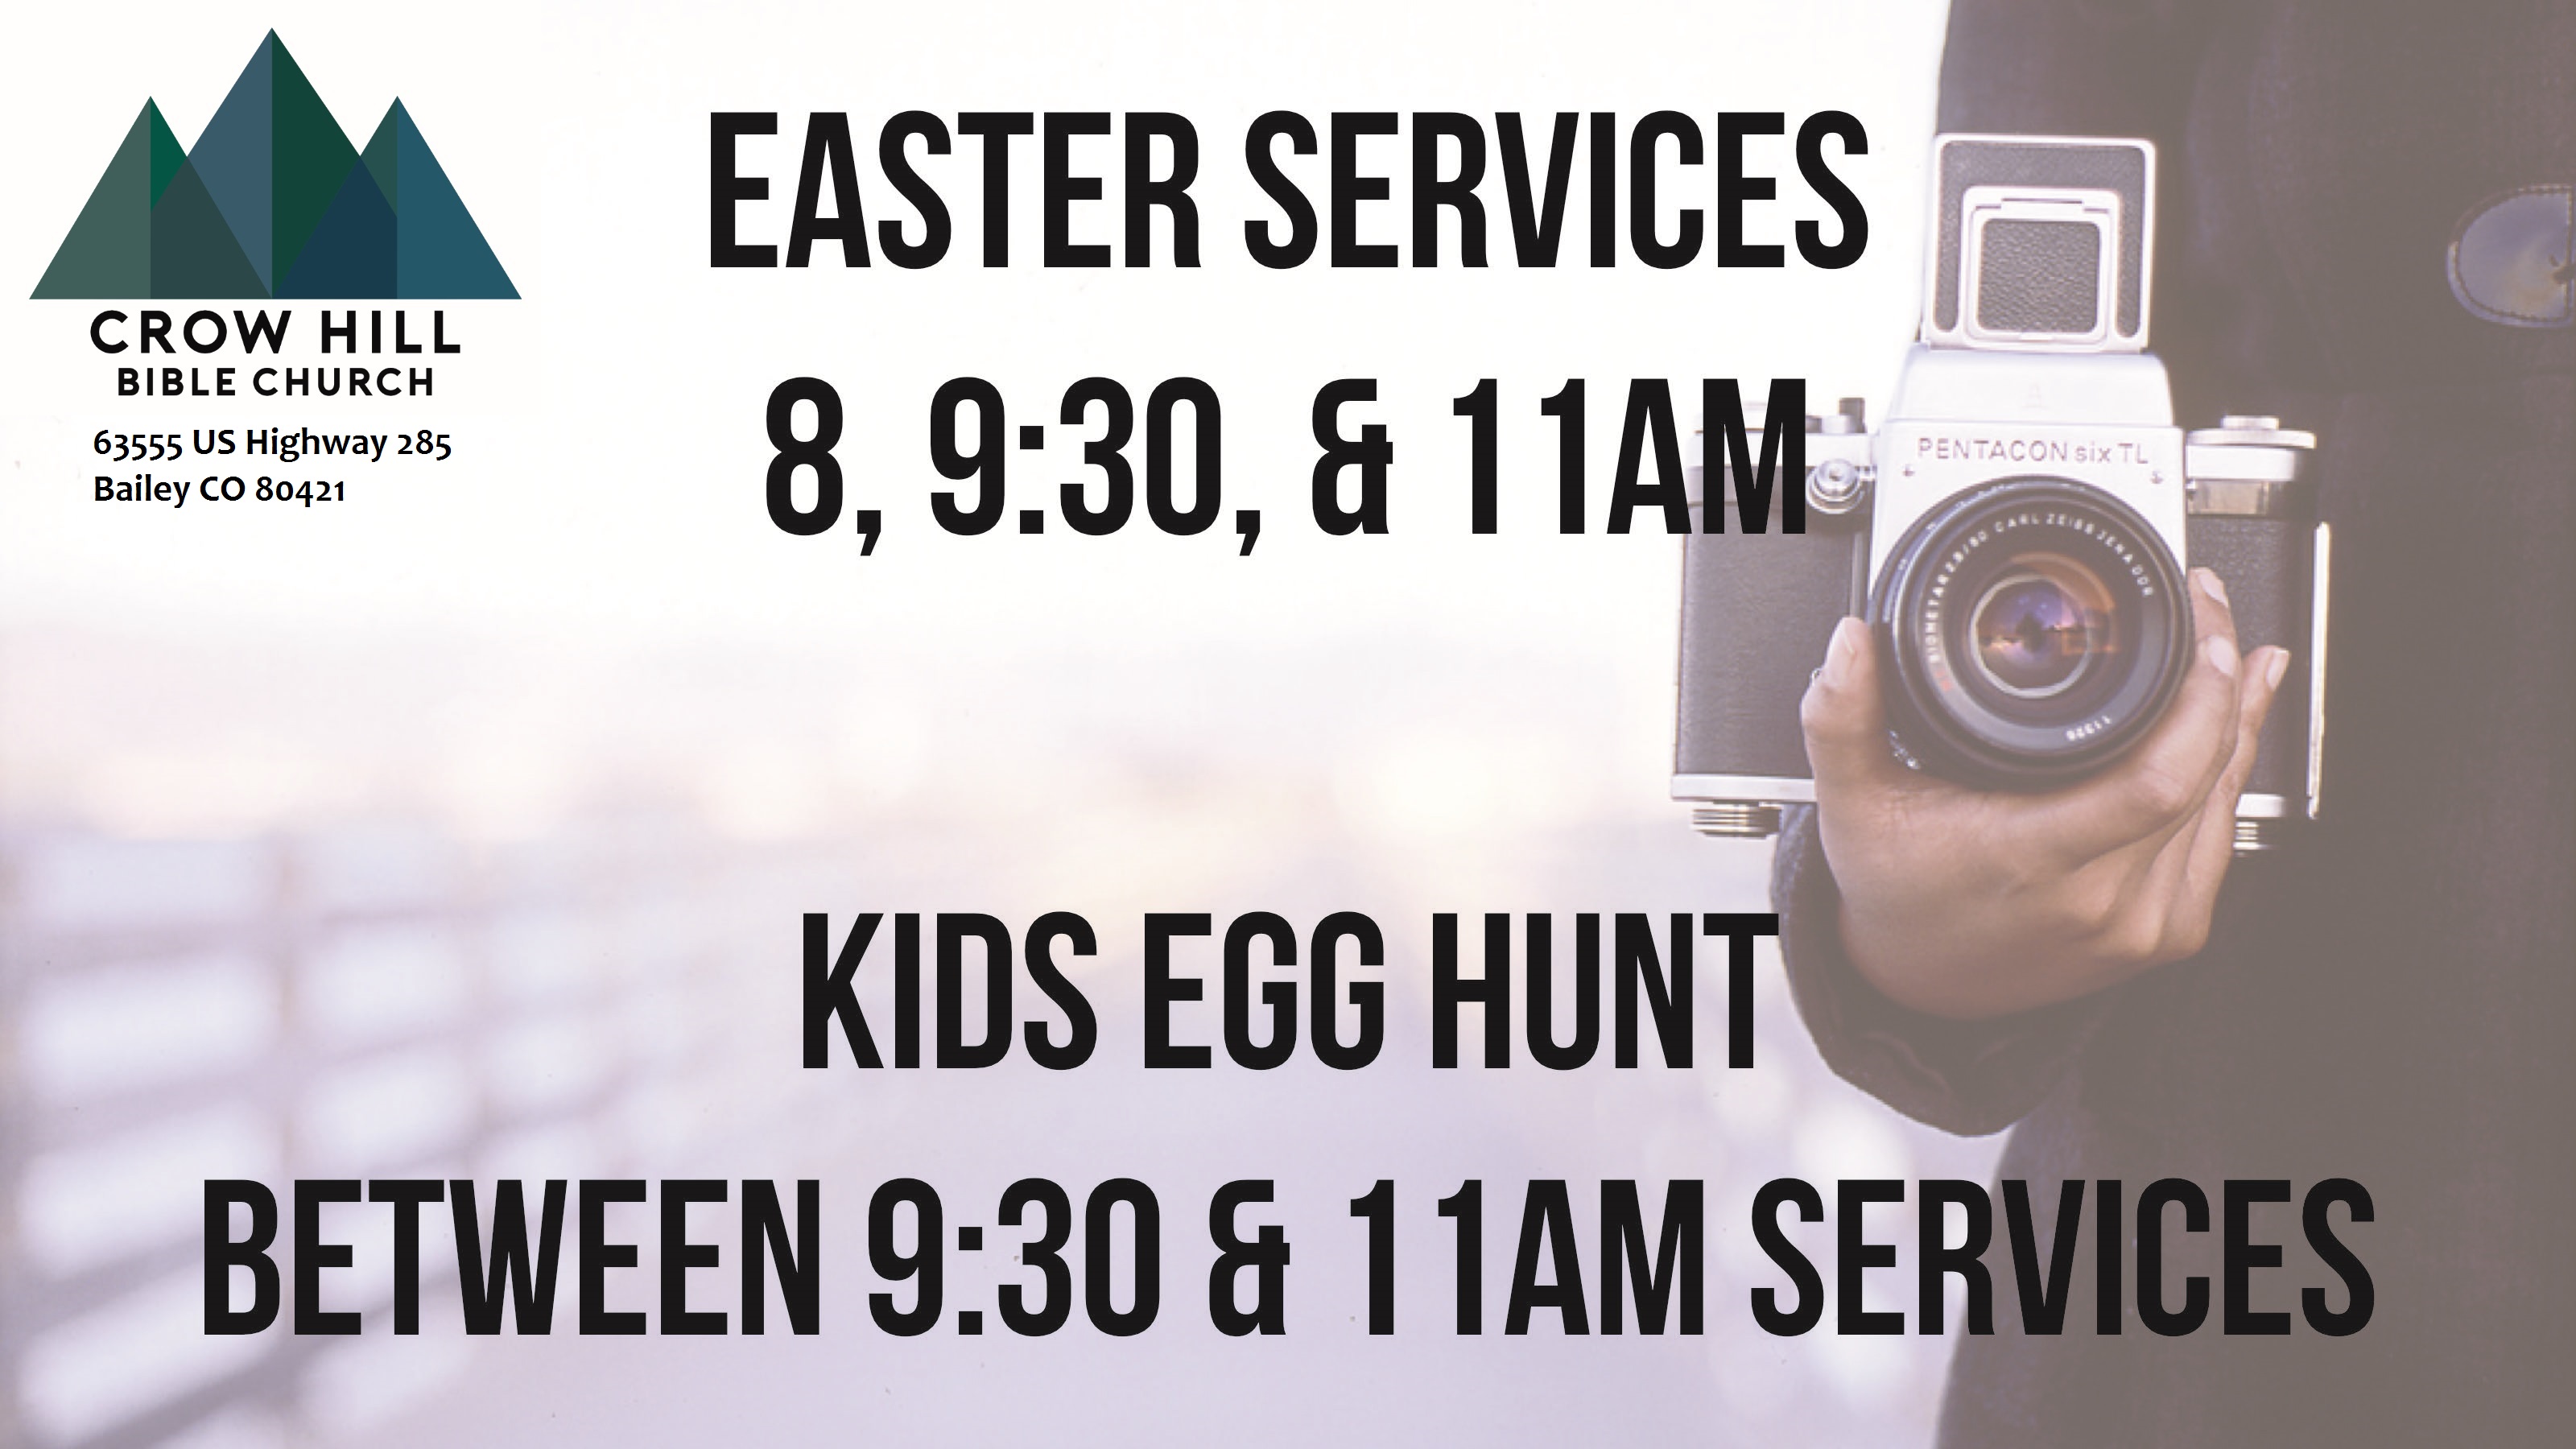 CHBC EasterServices 2018 external